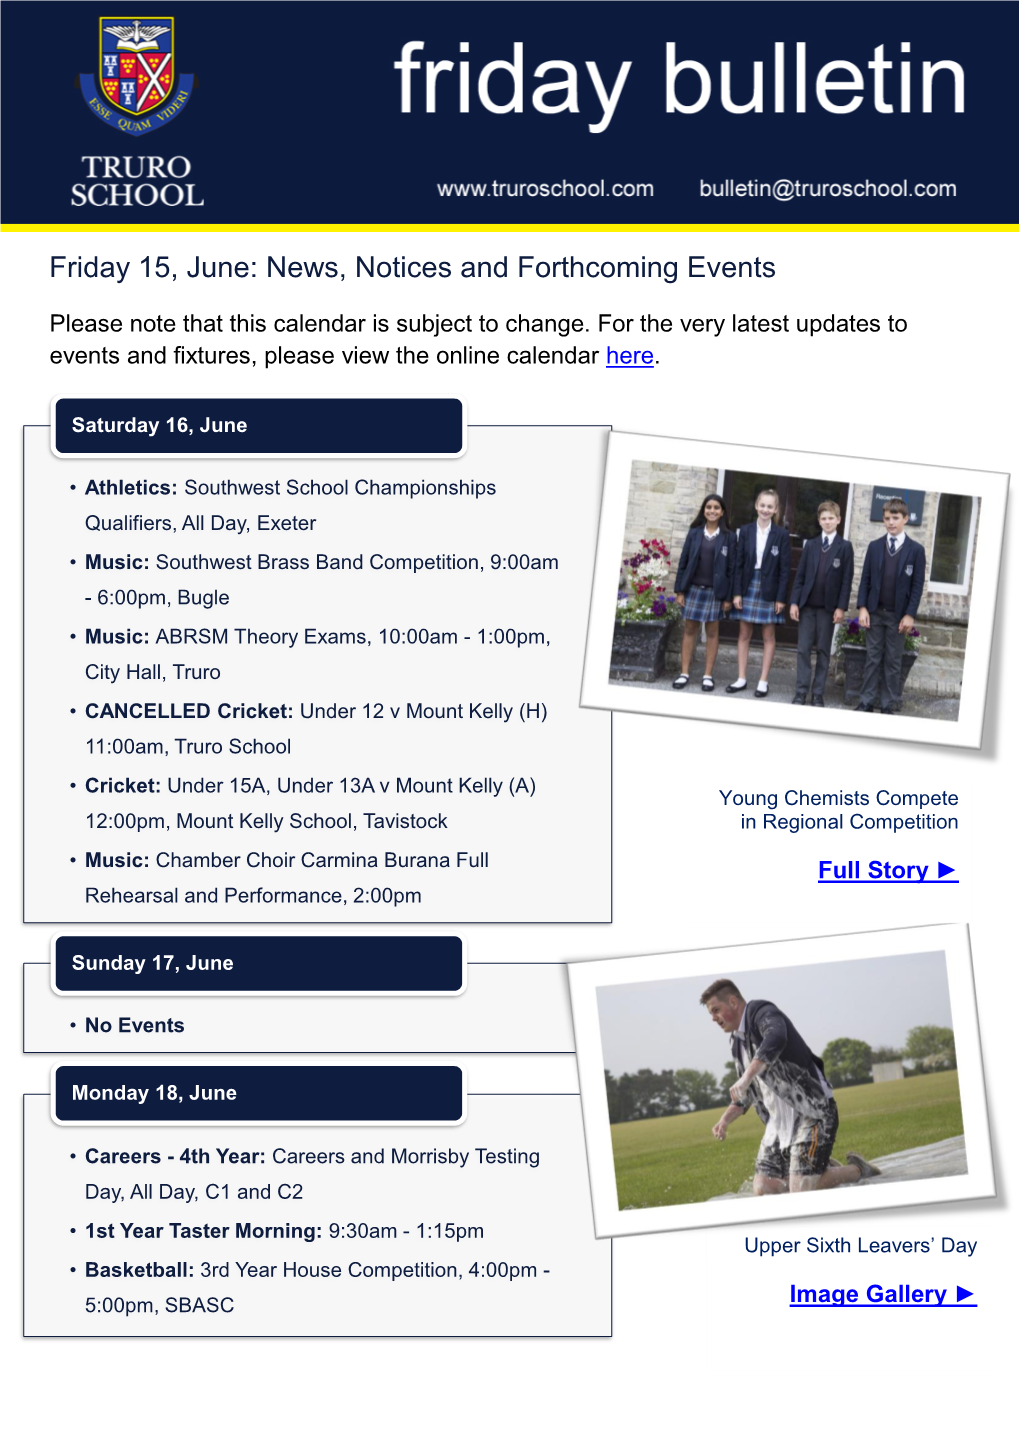 Friday 15, June: News, Notices and Forthcoming Events